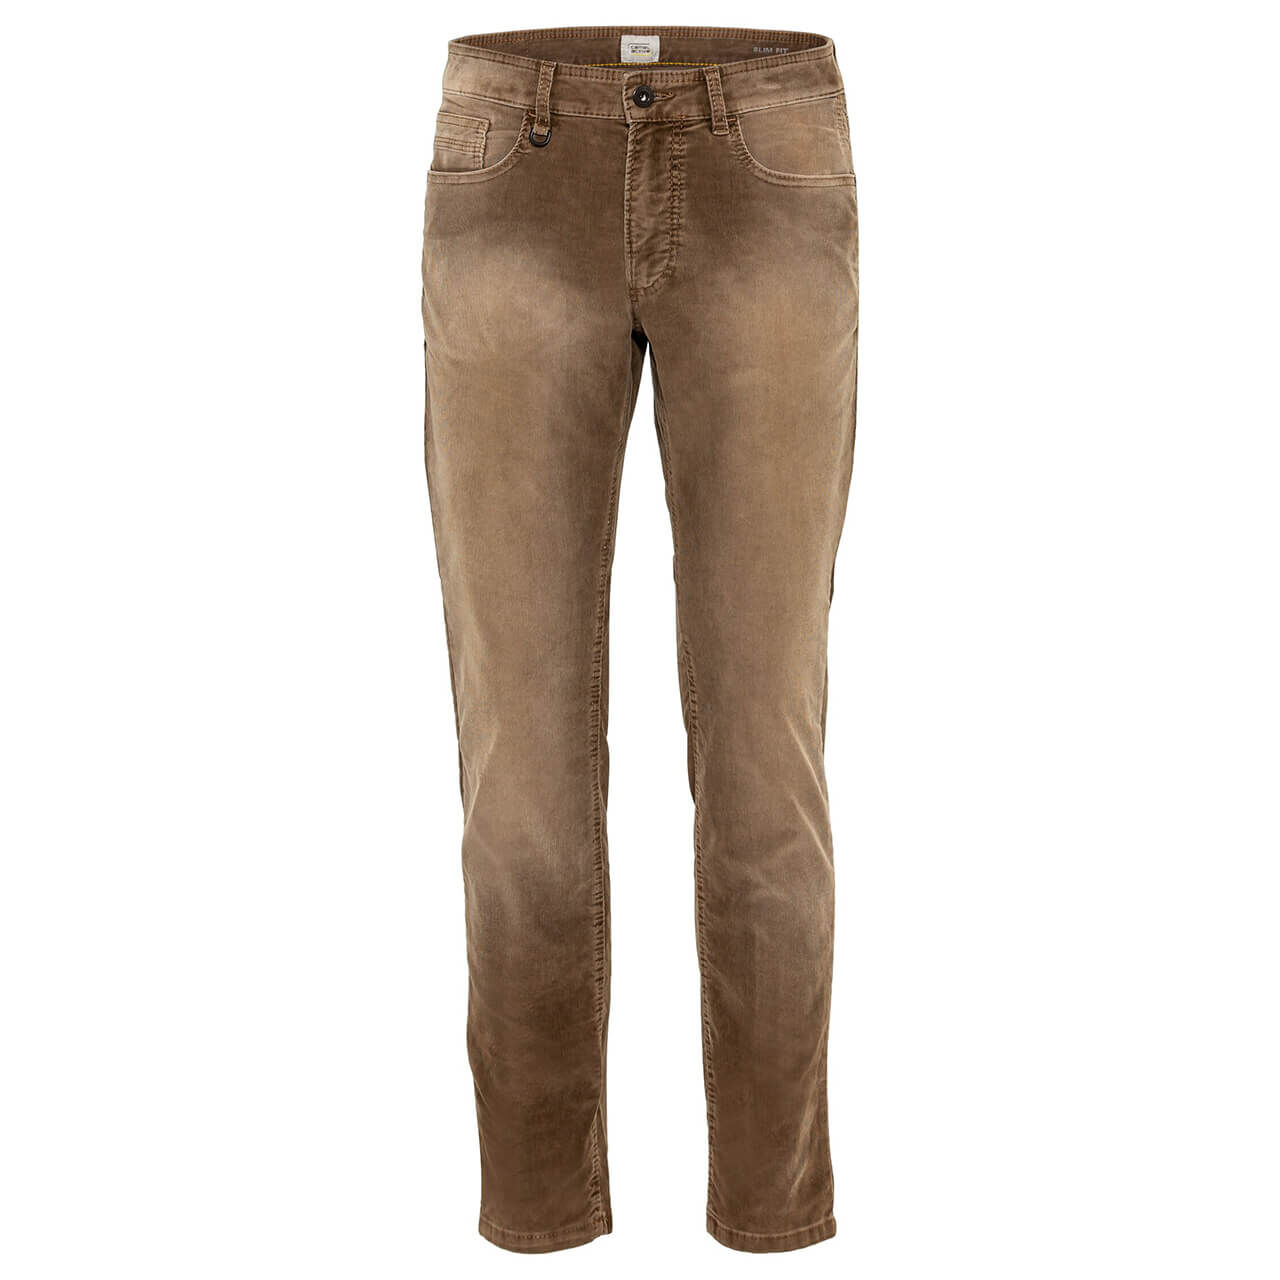 Camel active Madison Cordhose toffee used